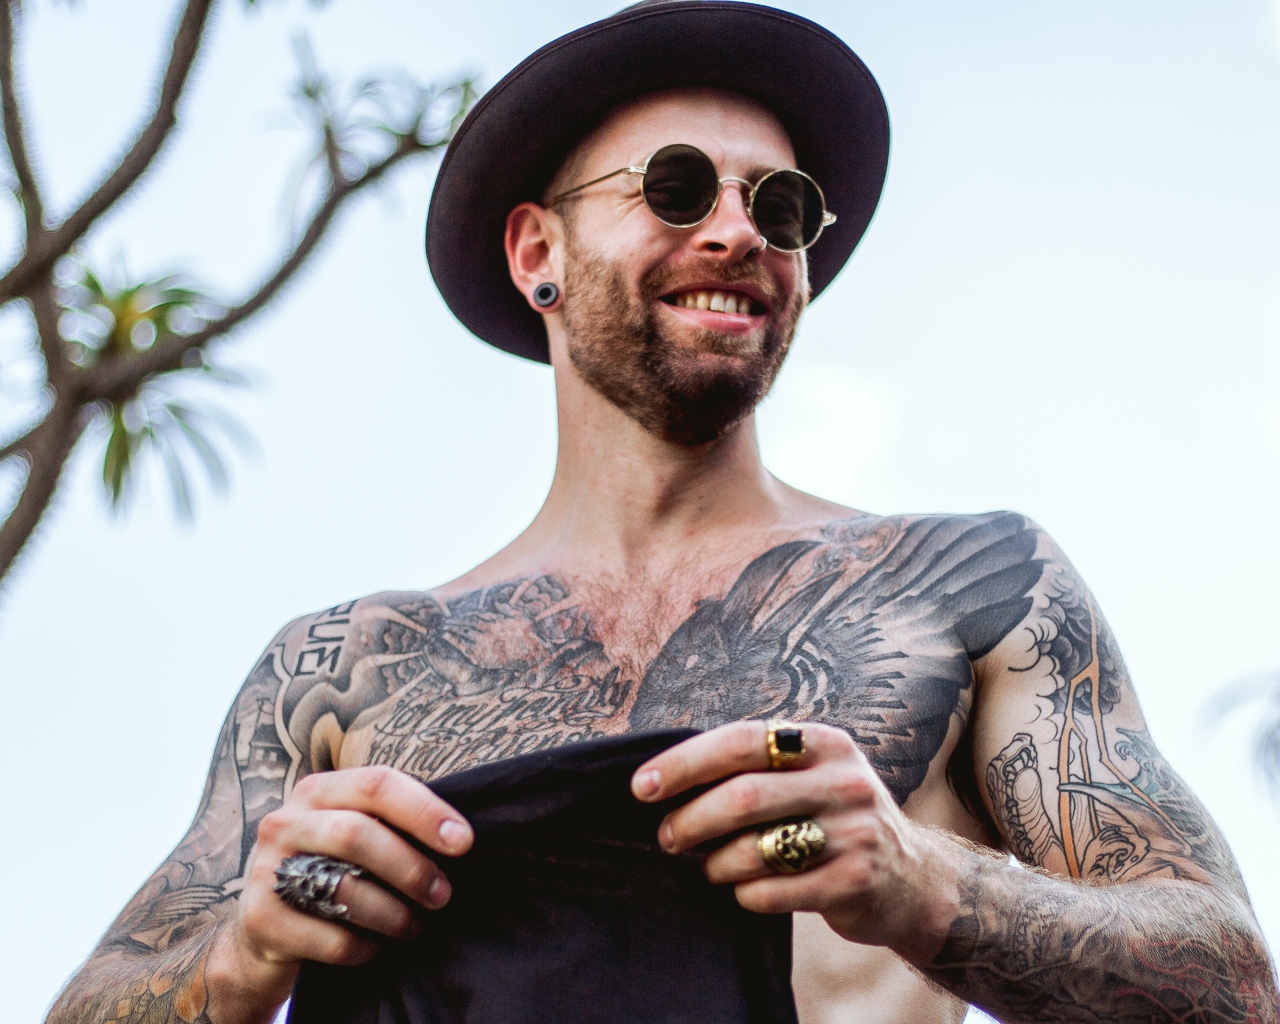 A man with tattoos on his body in a black hat and glasses